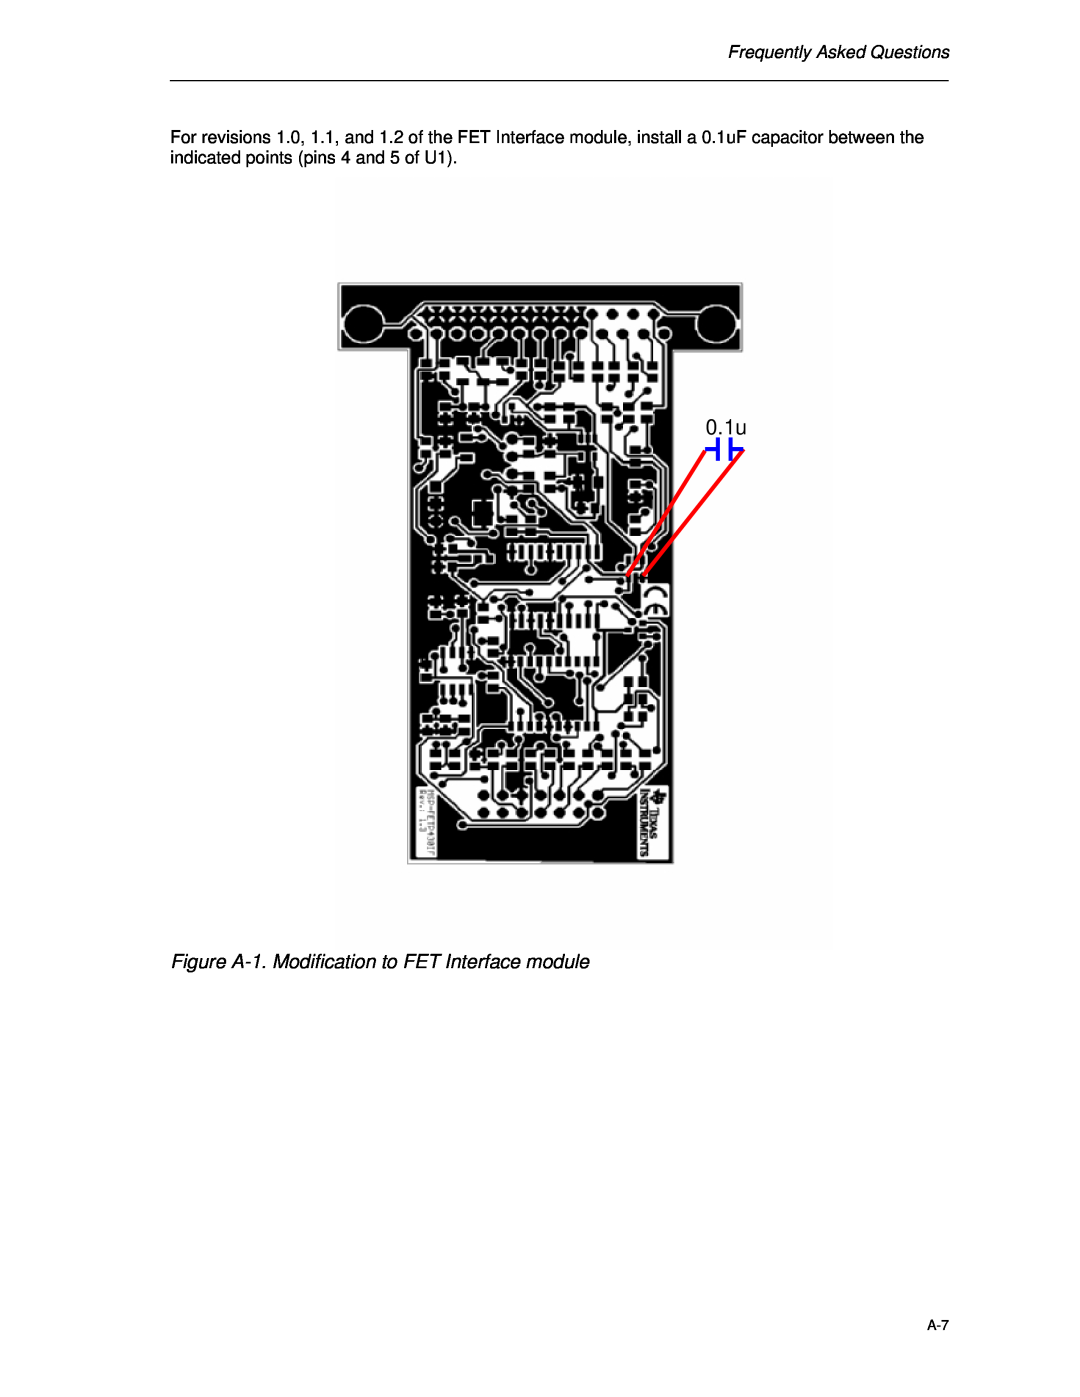 Texas Instruments MSP-FET430 manual Figure A-1. Modification to FET Interface module, 0.1u, Frequently Asked Questions 